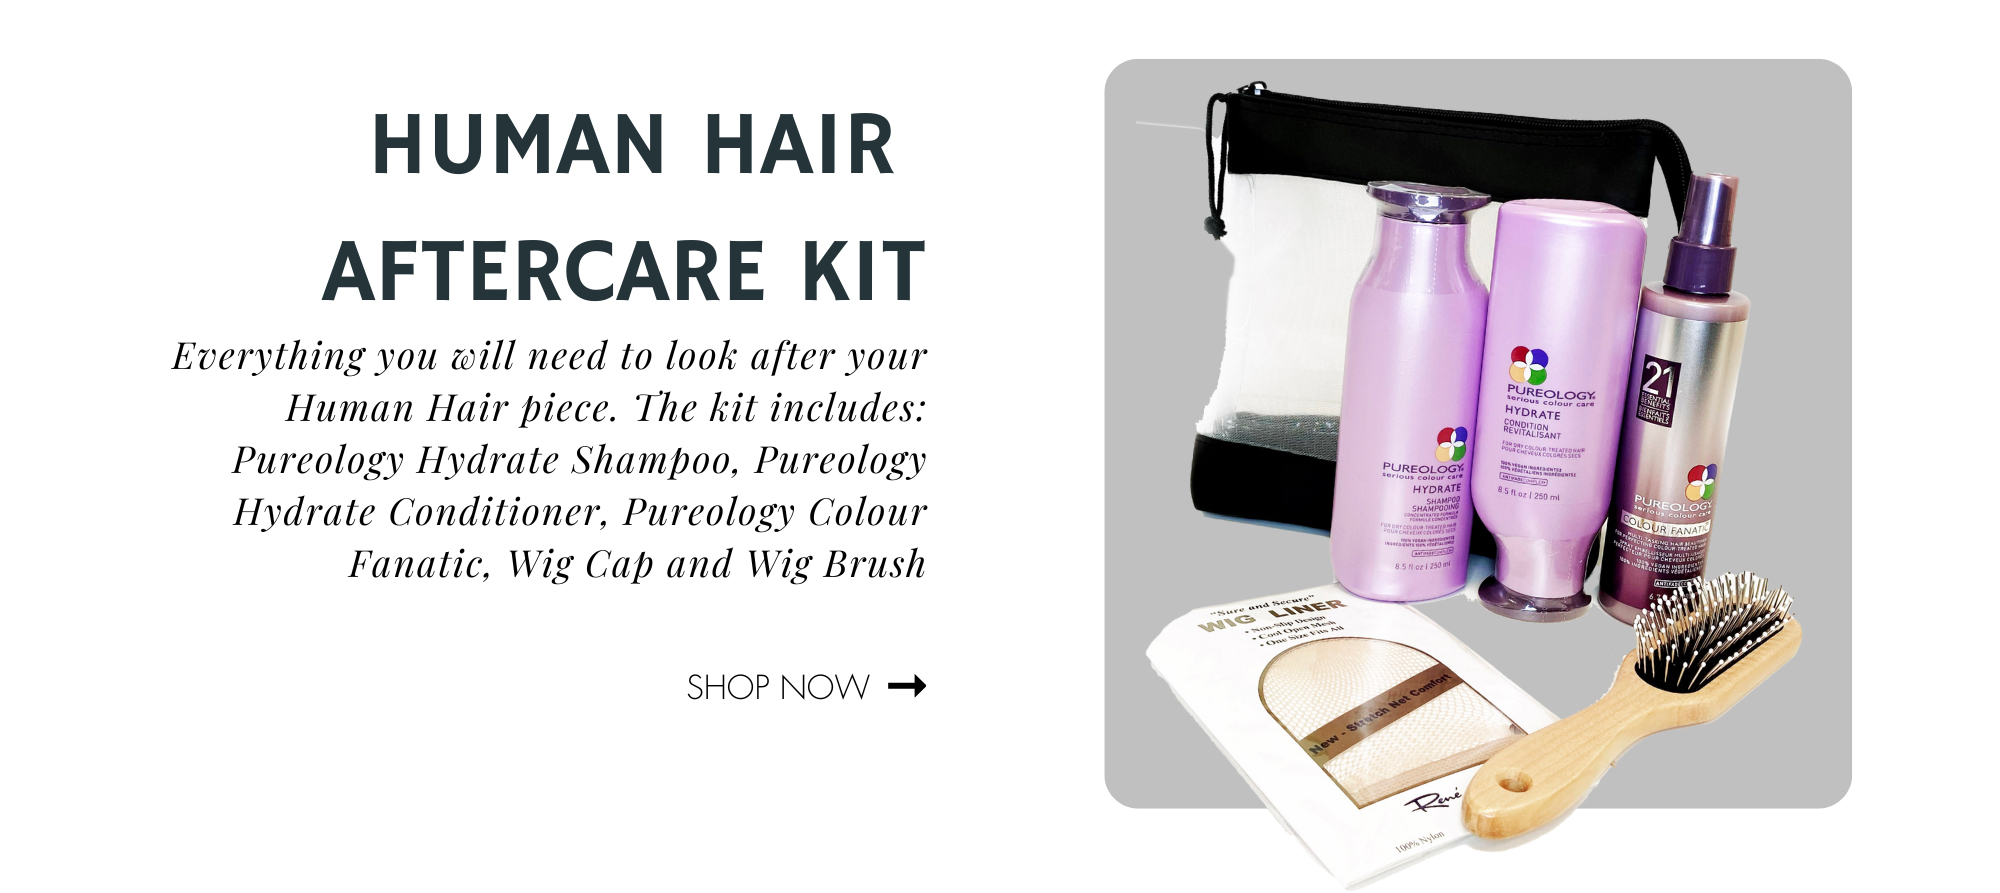 Everything you will need to look after your Human Hair piece. The kit includes: Pureology Hydrate Shampoo, Pureology Hydrate Conditioner, Pureology Colour Fanatic, Wig Cap and Wig Brush